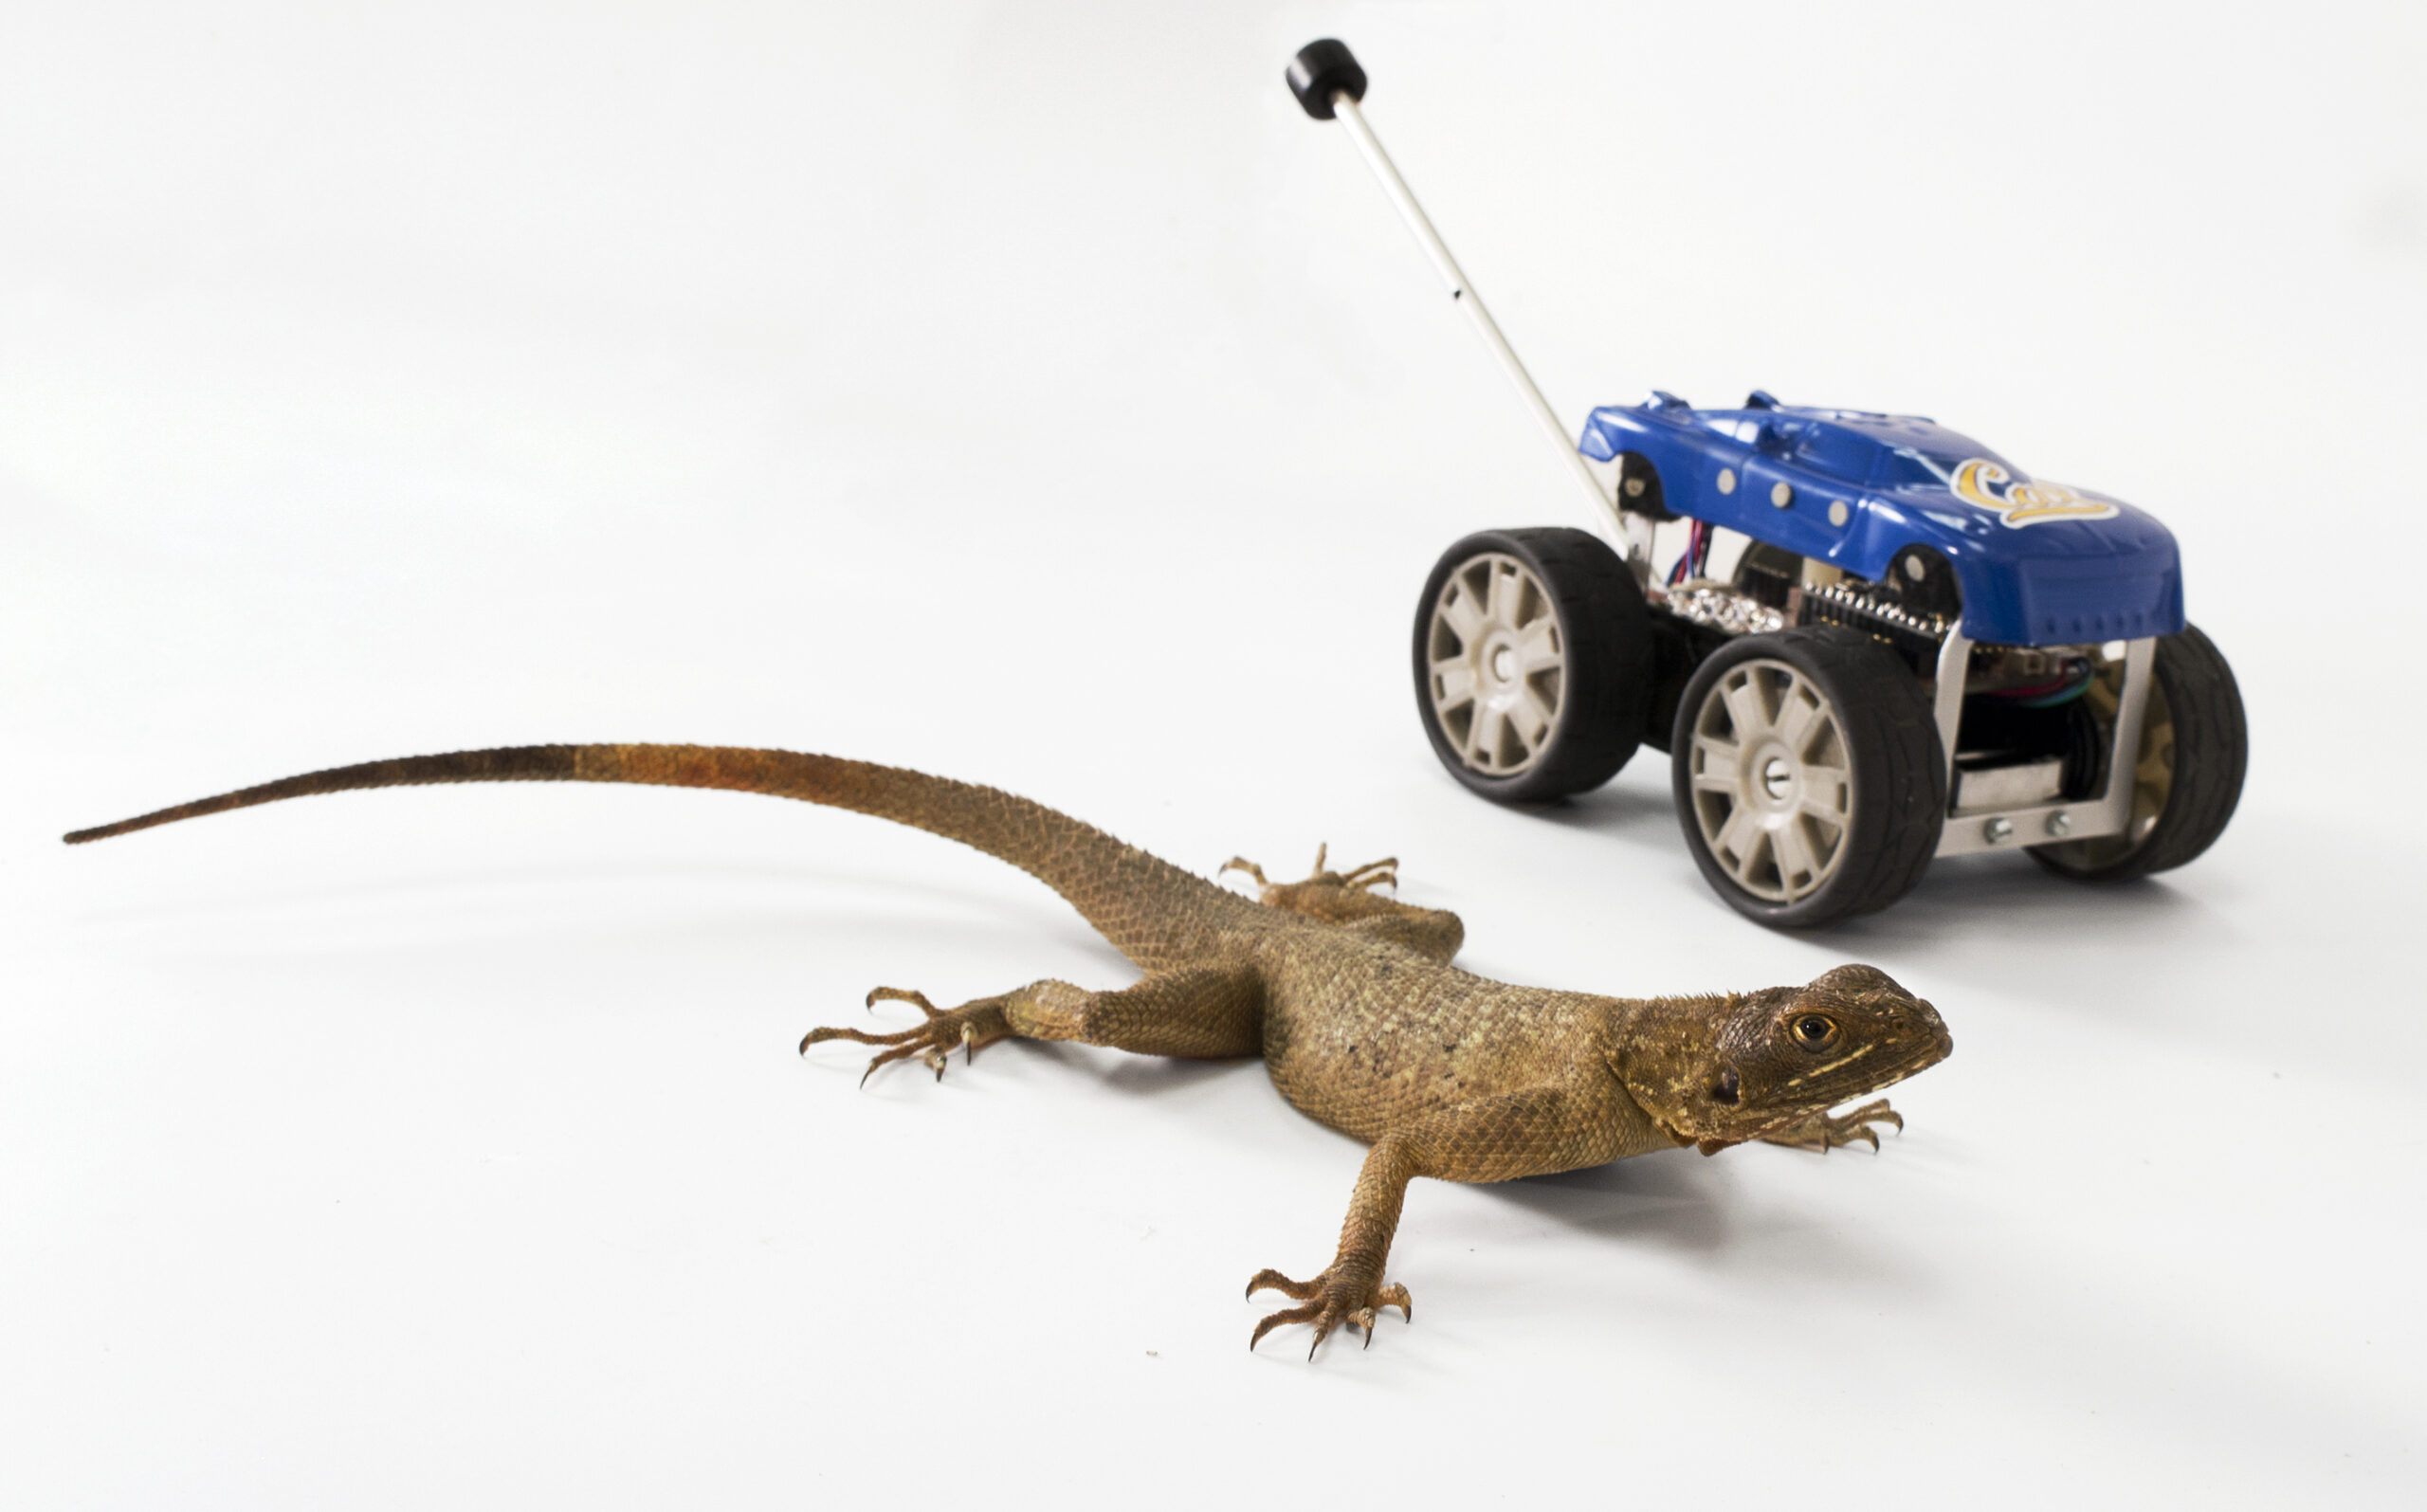 Video: Leaping Lizards’ Helpful Tails Inspire New Robot Design